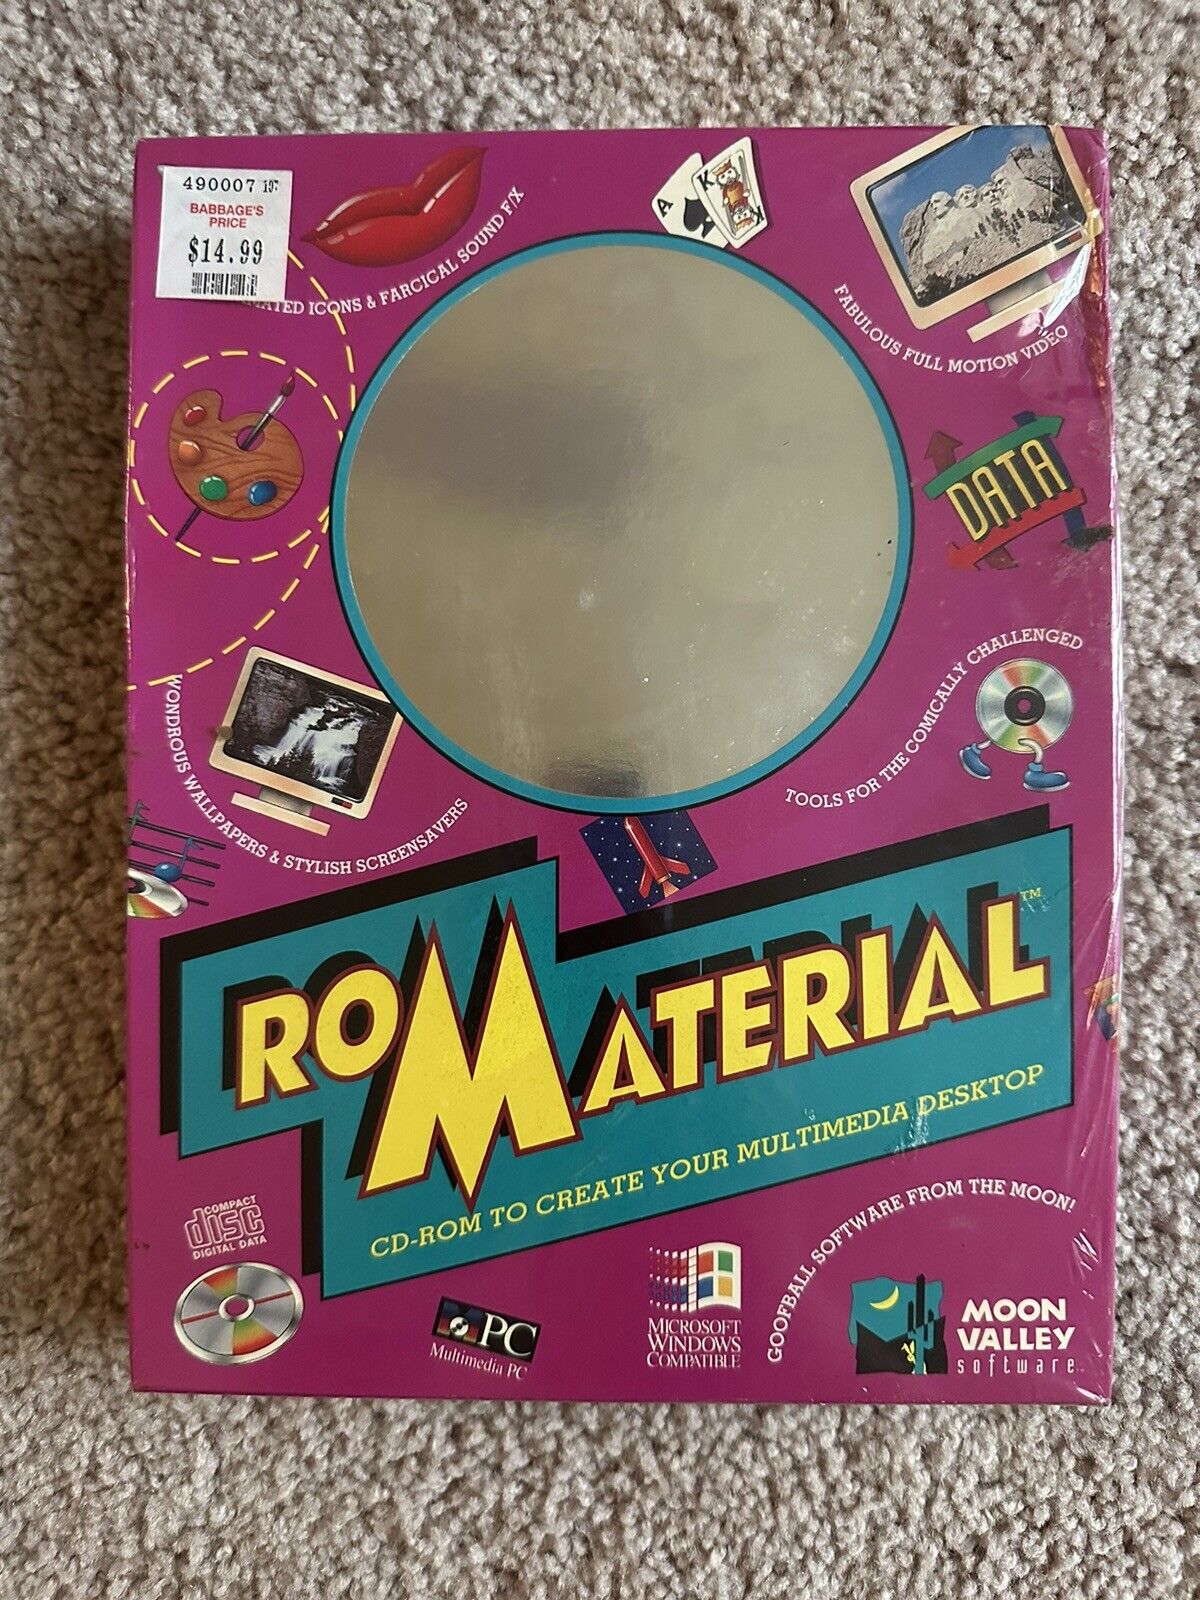 ROMATERIAL 1993 Vintage CD ROM Big Box Moon Valley Software New Sealed